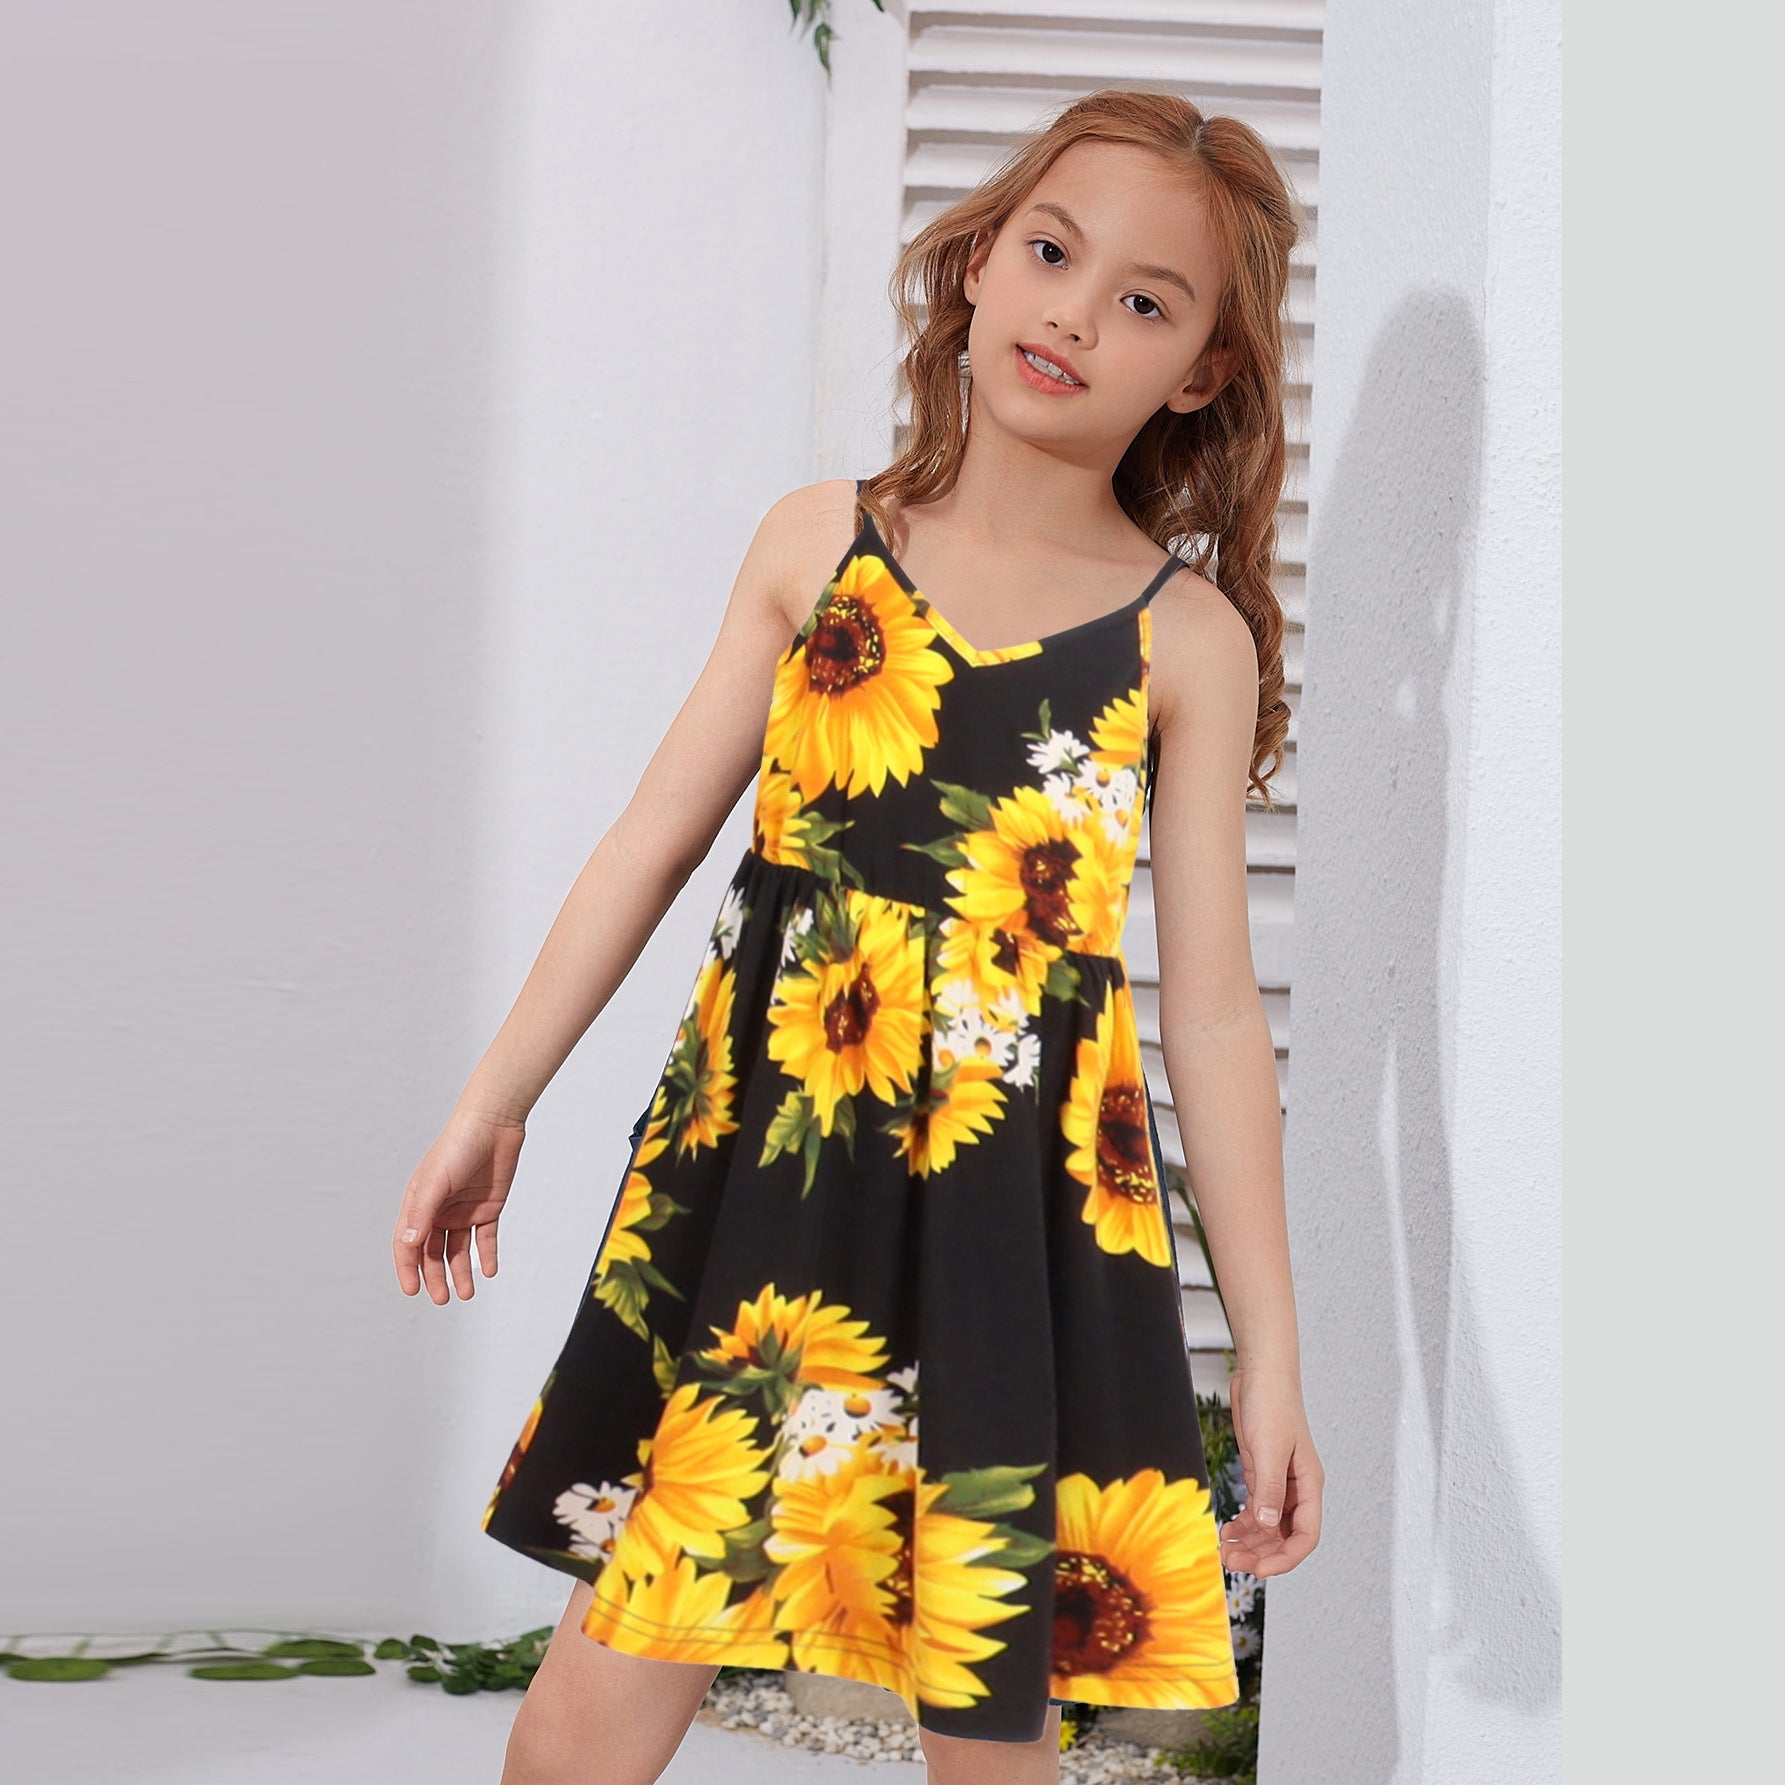 All Over Sunflowers Floral Print Black Spaghetti Strap Dress for Mom and Me